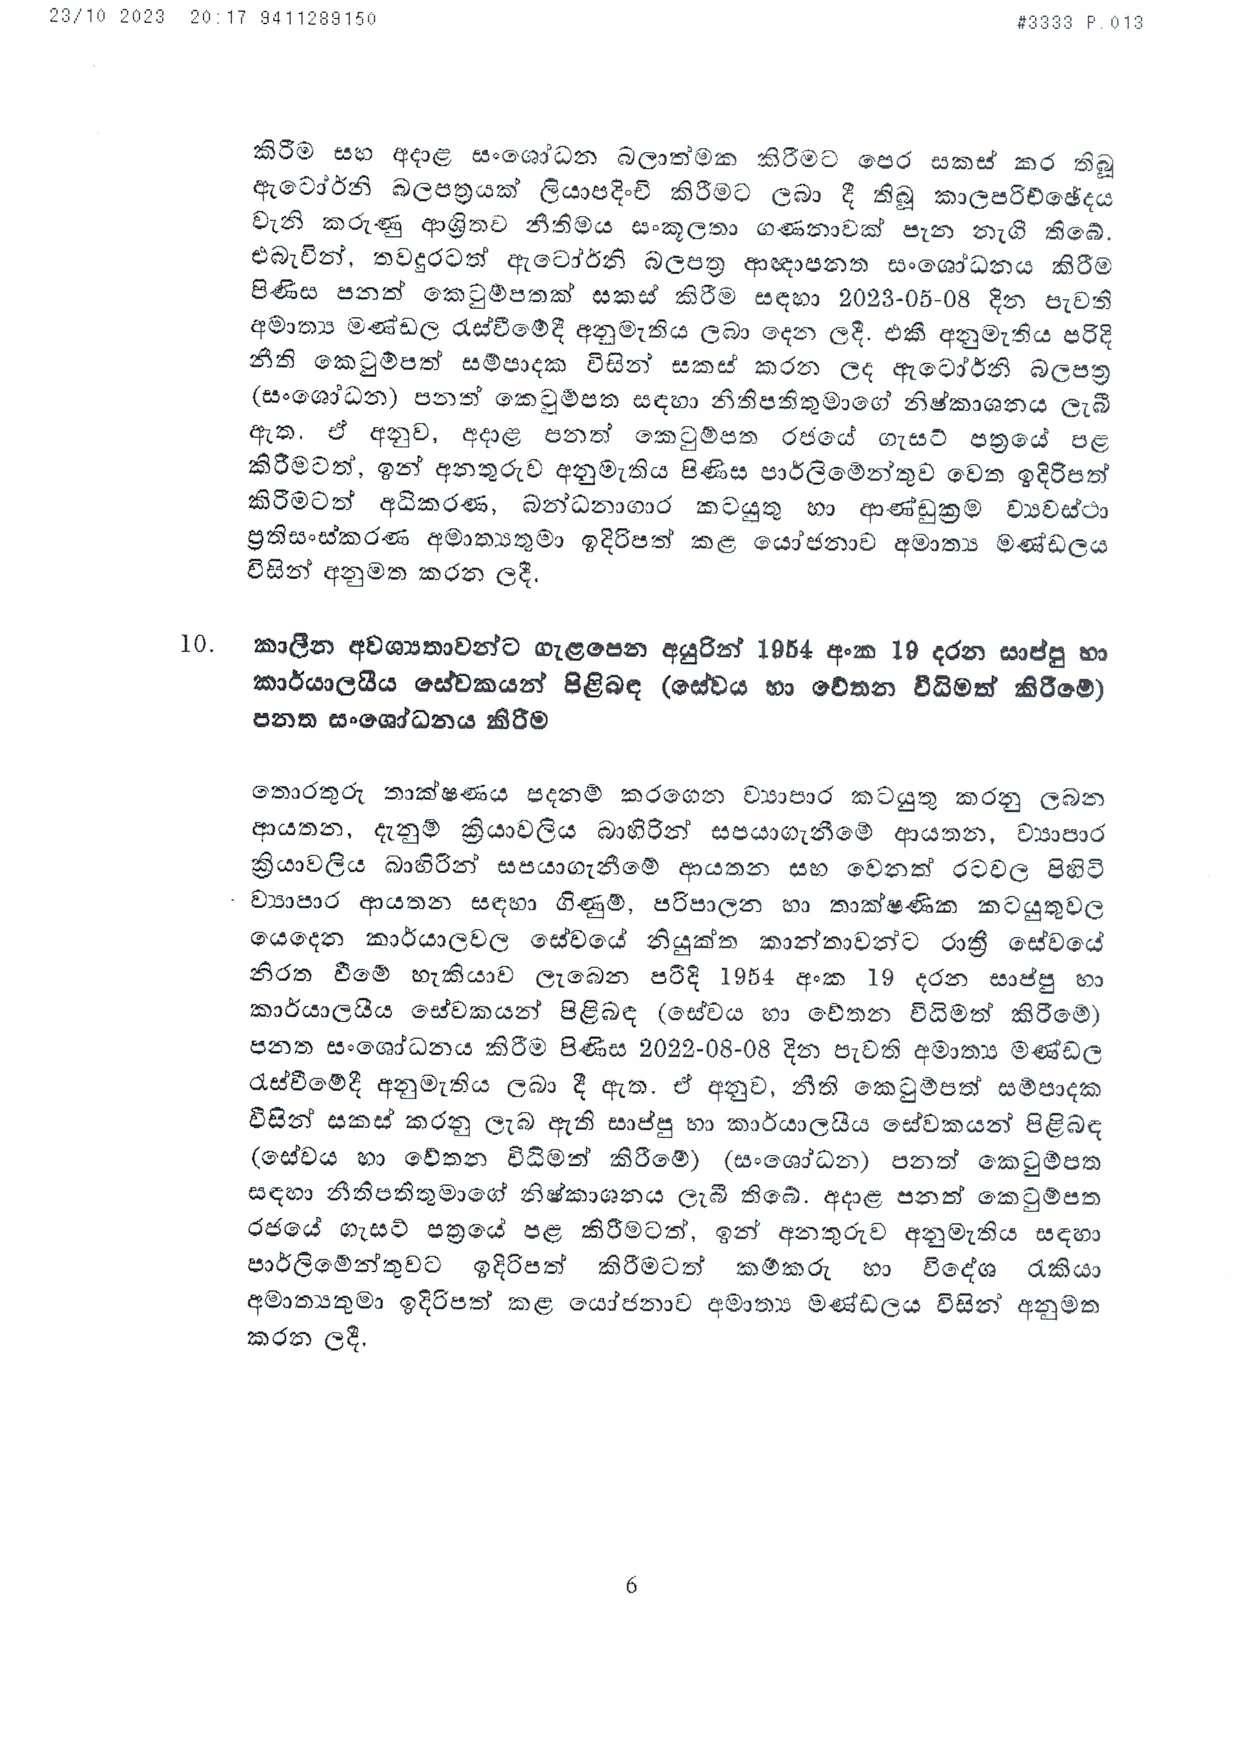 Cabinet Decision on 23.10.2023 page 006